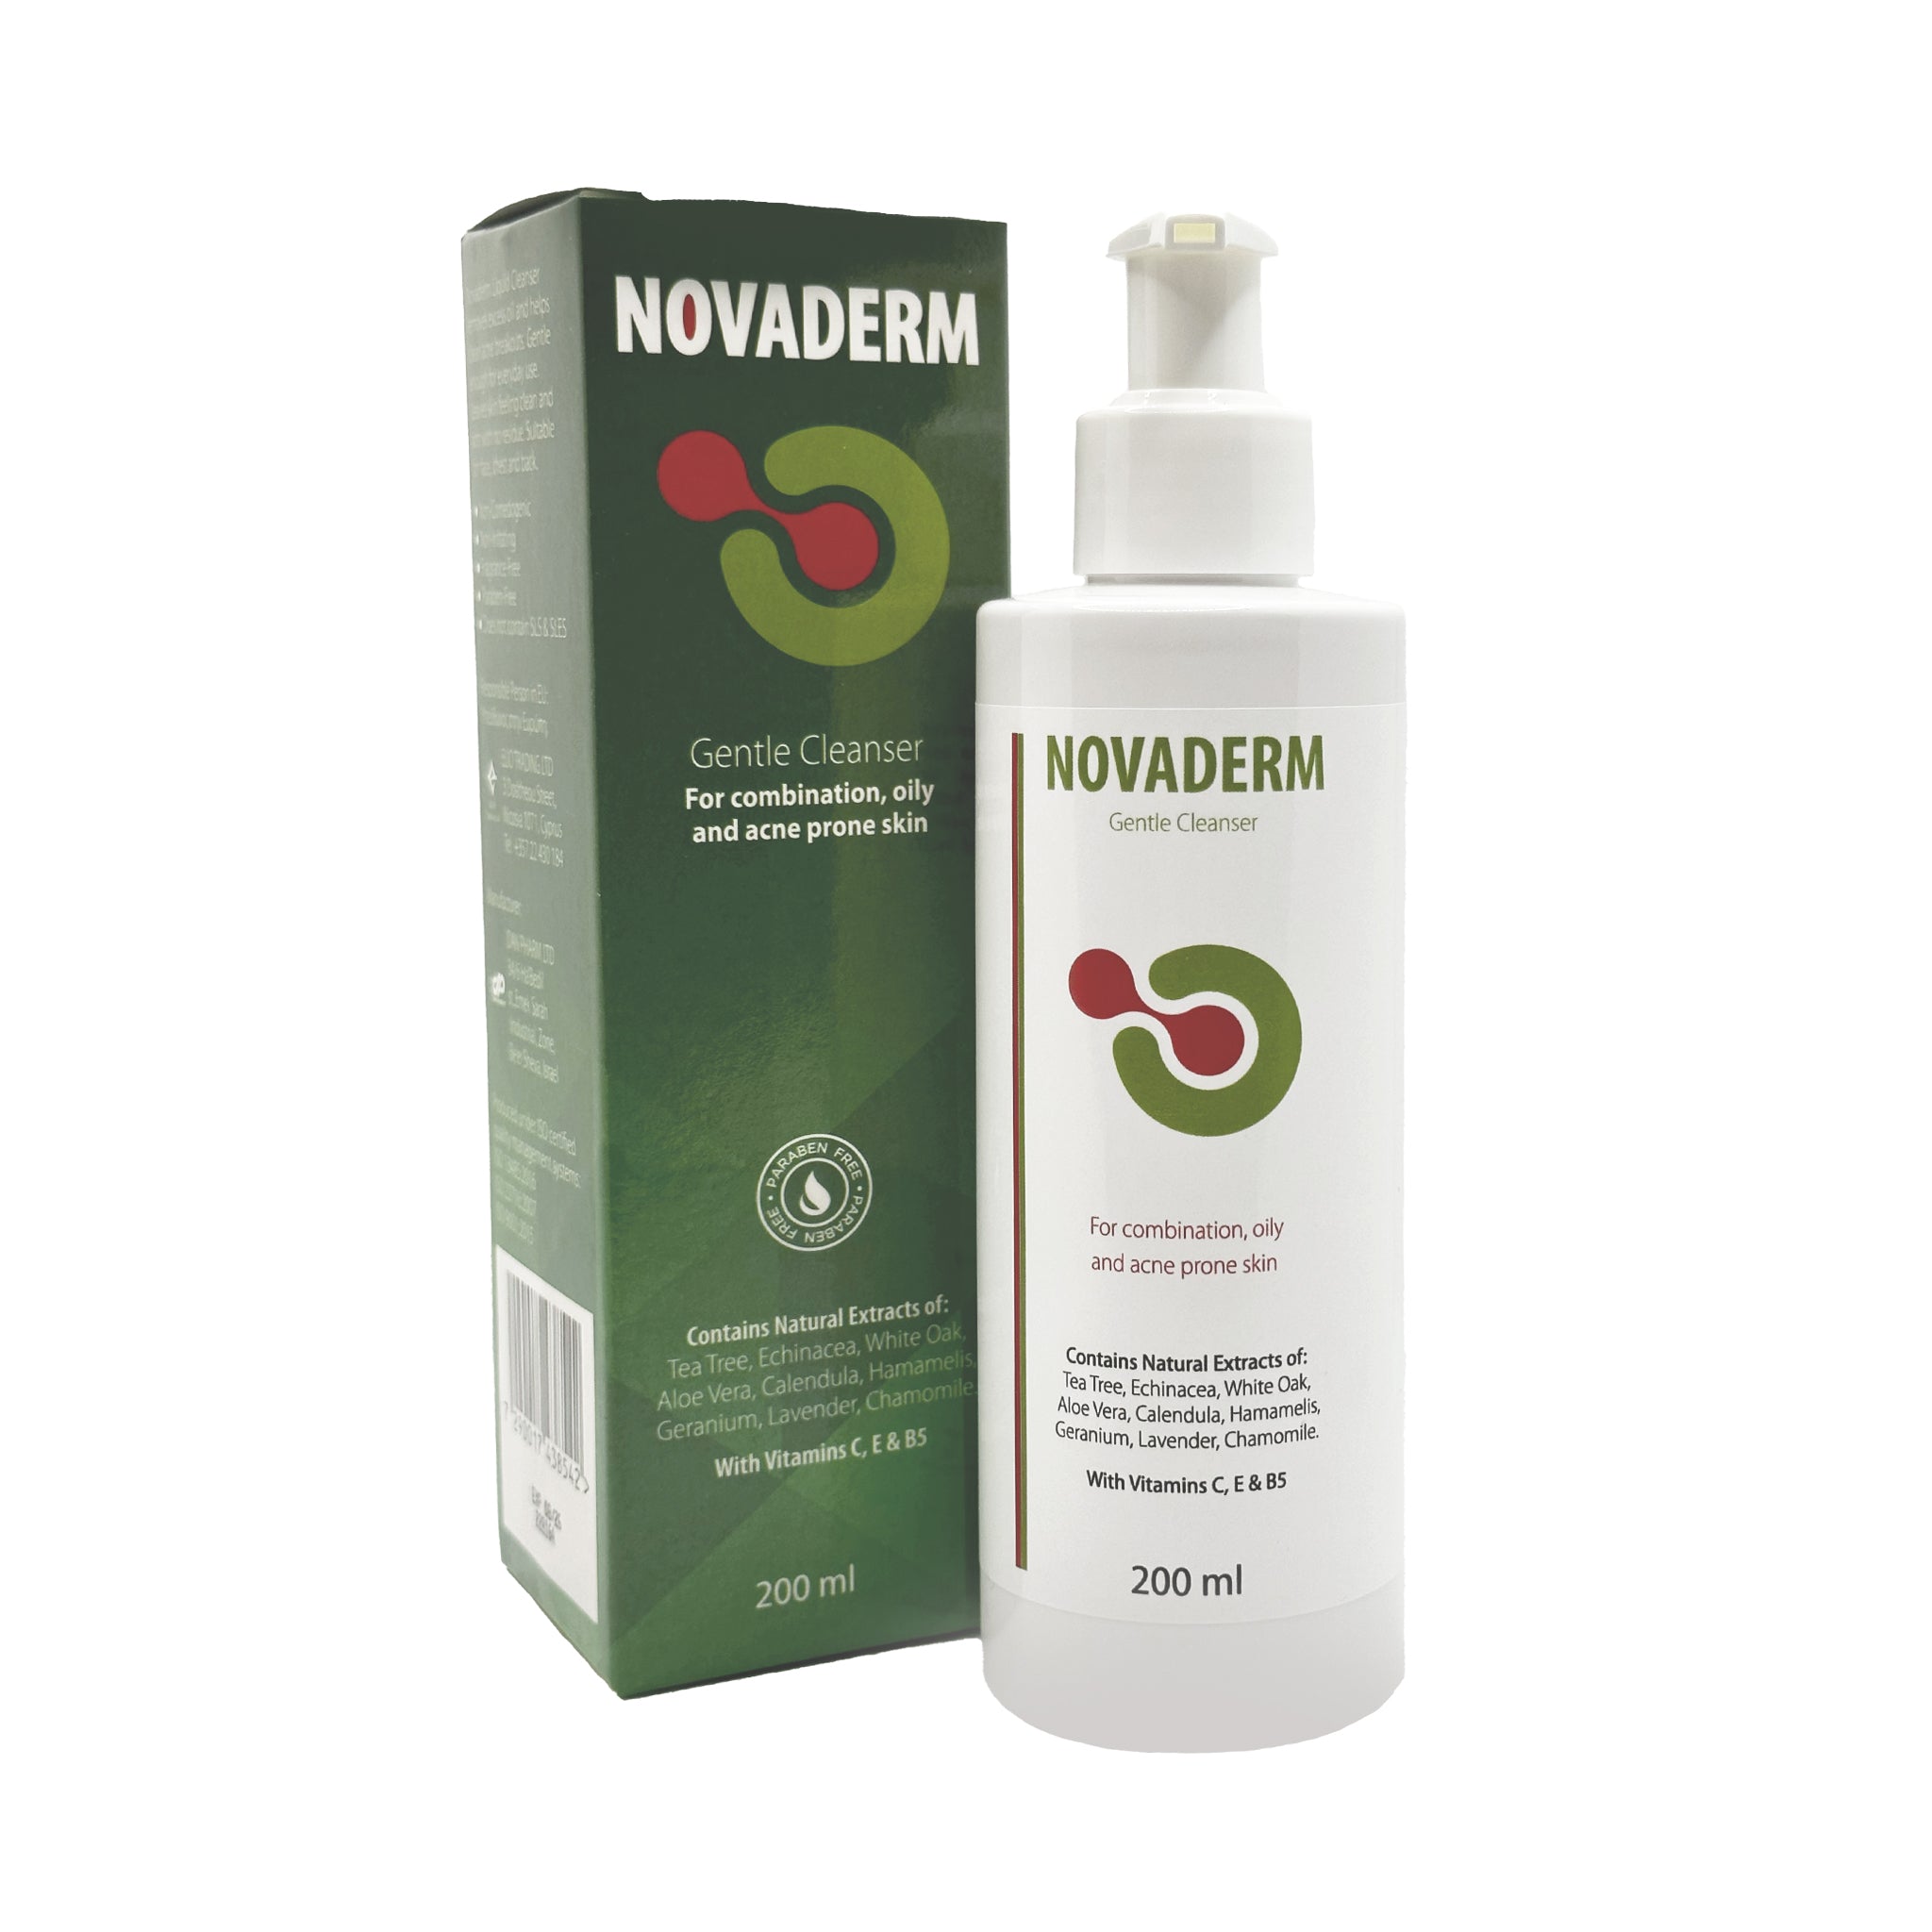 Novaderm Gentle Cleanser For Combination, Oily and Acne Prone Skin. Face Wash For The Treatment and Clearing of Pimples. Removes Blackheads. 200ml/6.76Fl.Oz